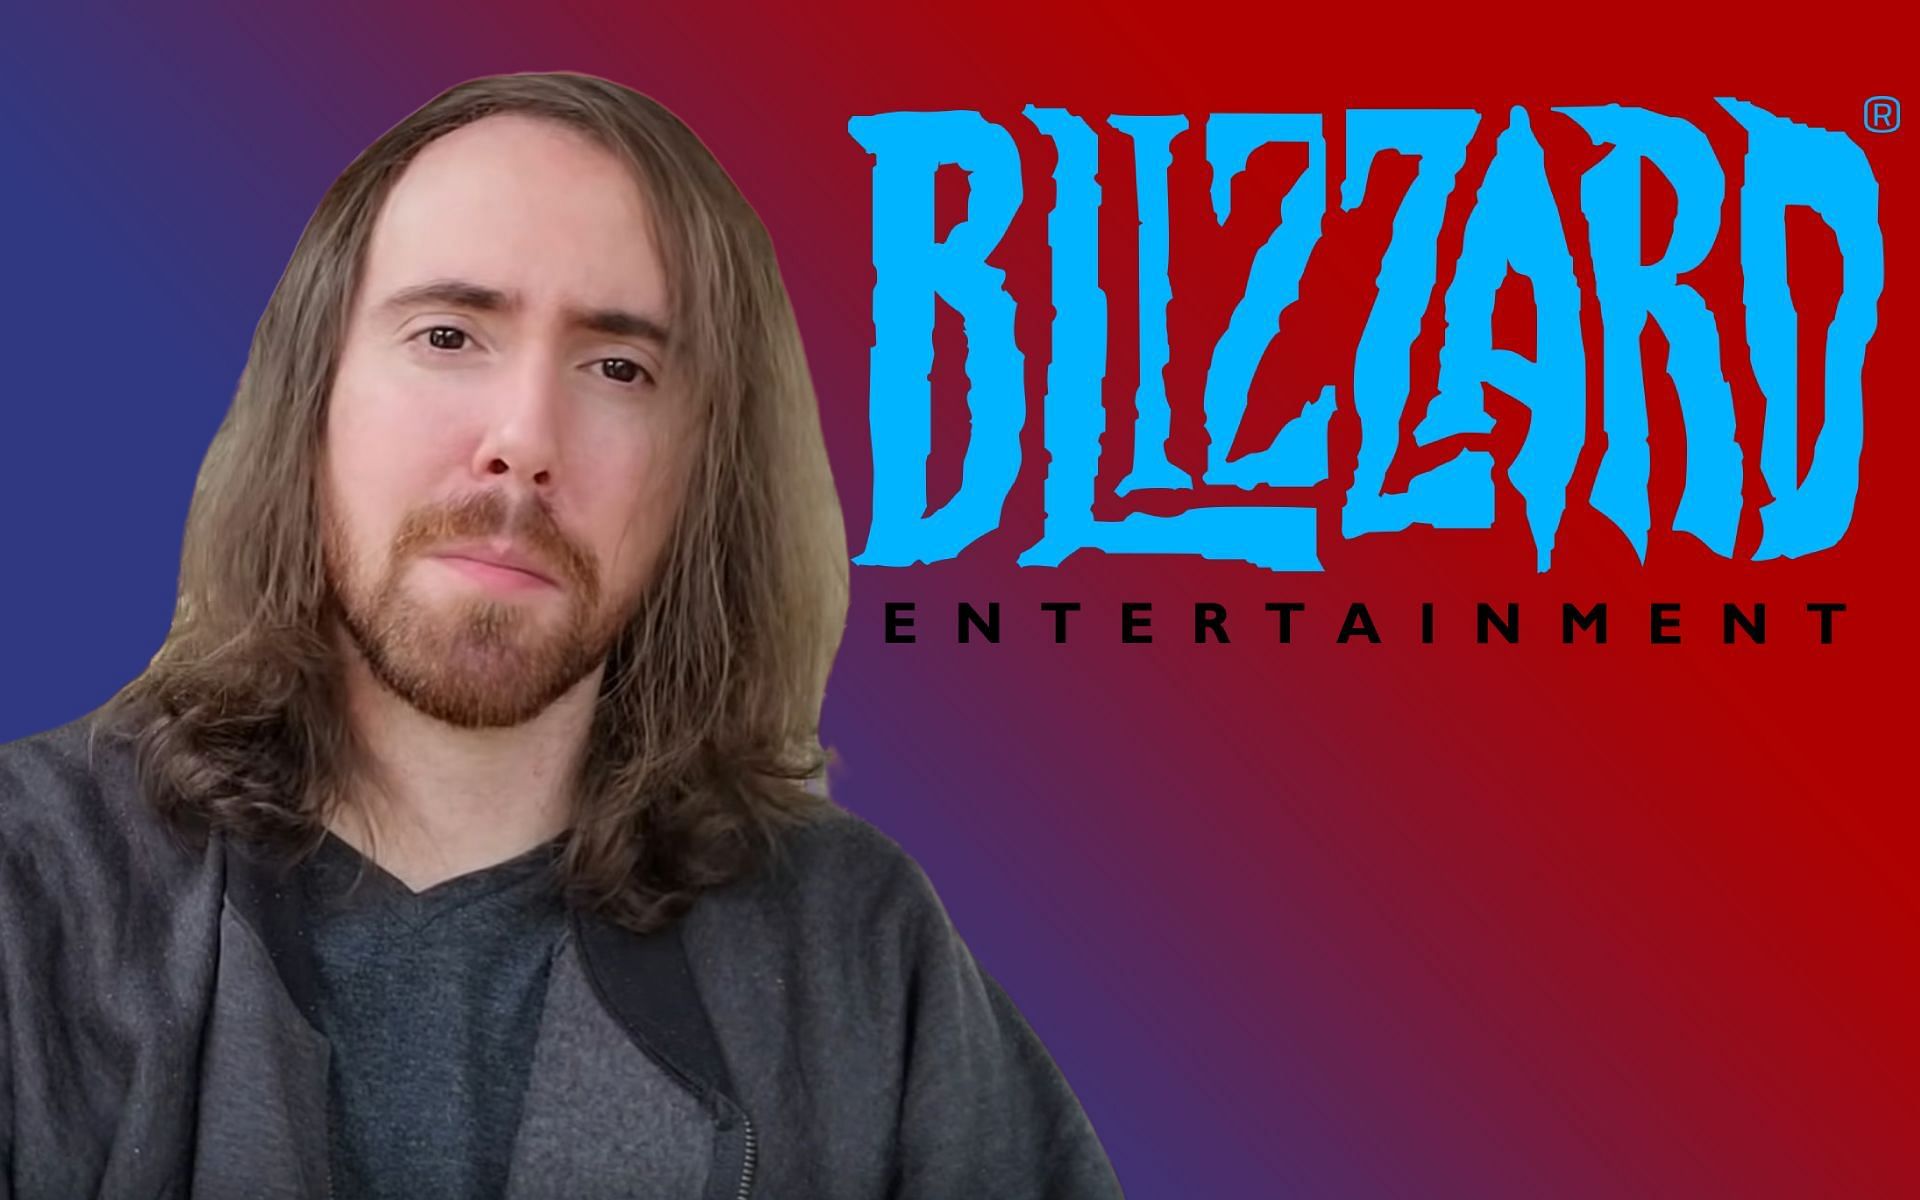 Asmongold reacts to Blizzard Entertainment employee getting fired for seemingly writing corporate greed jokes (Image via Sportskeeda)